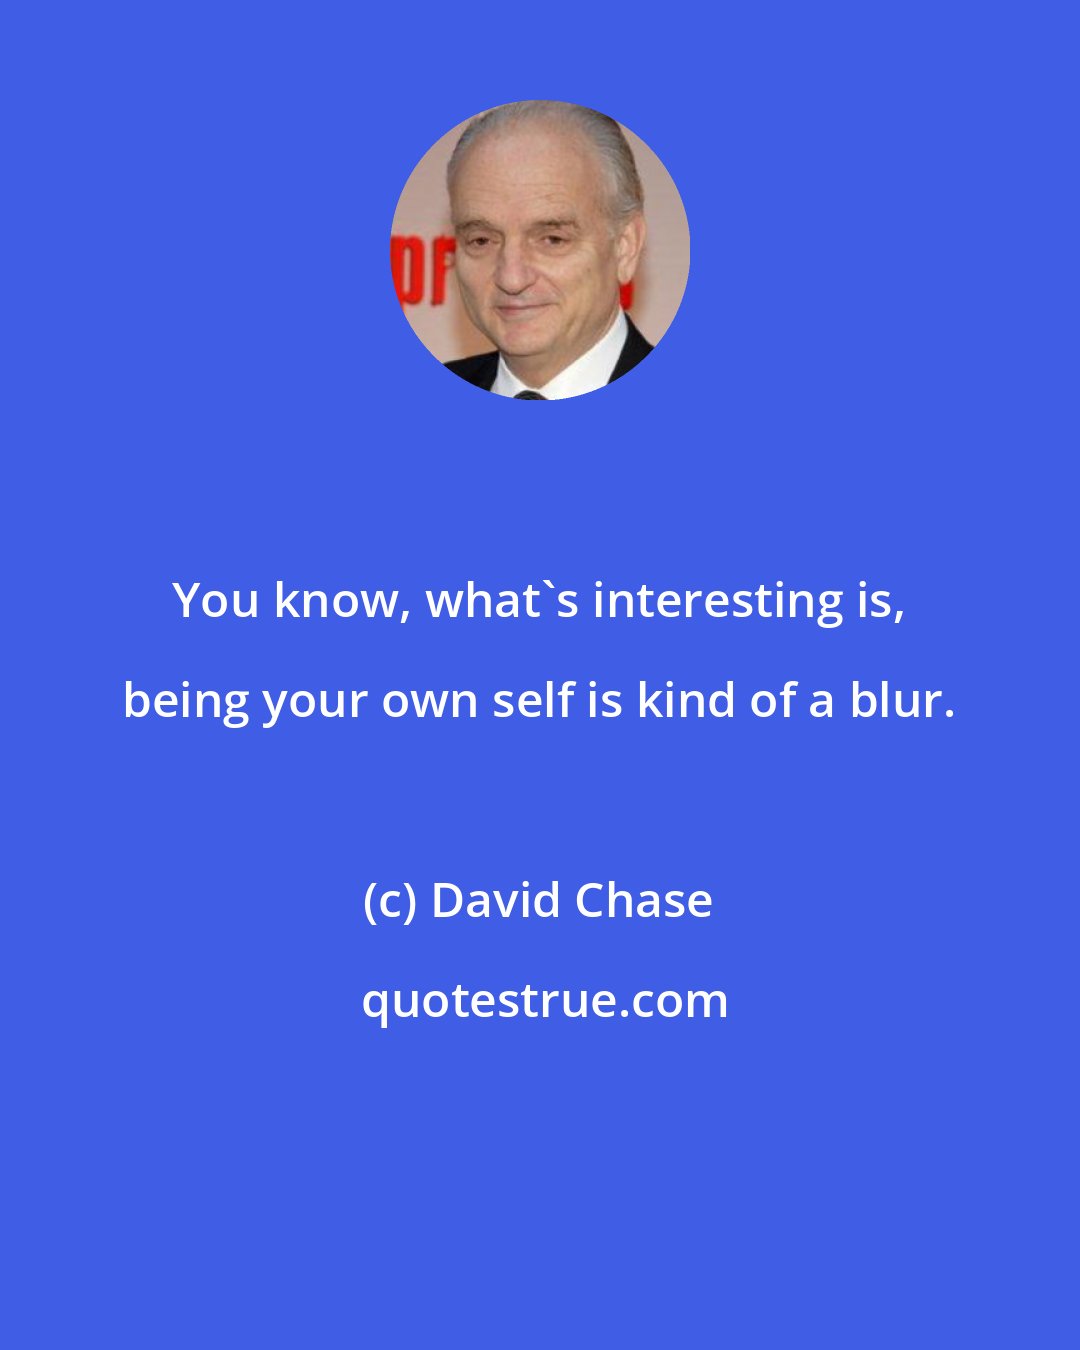 David Chase: You know, what's interesting is, being your own self is kind of a blur.